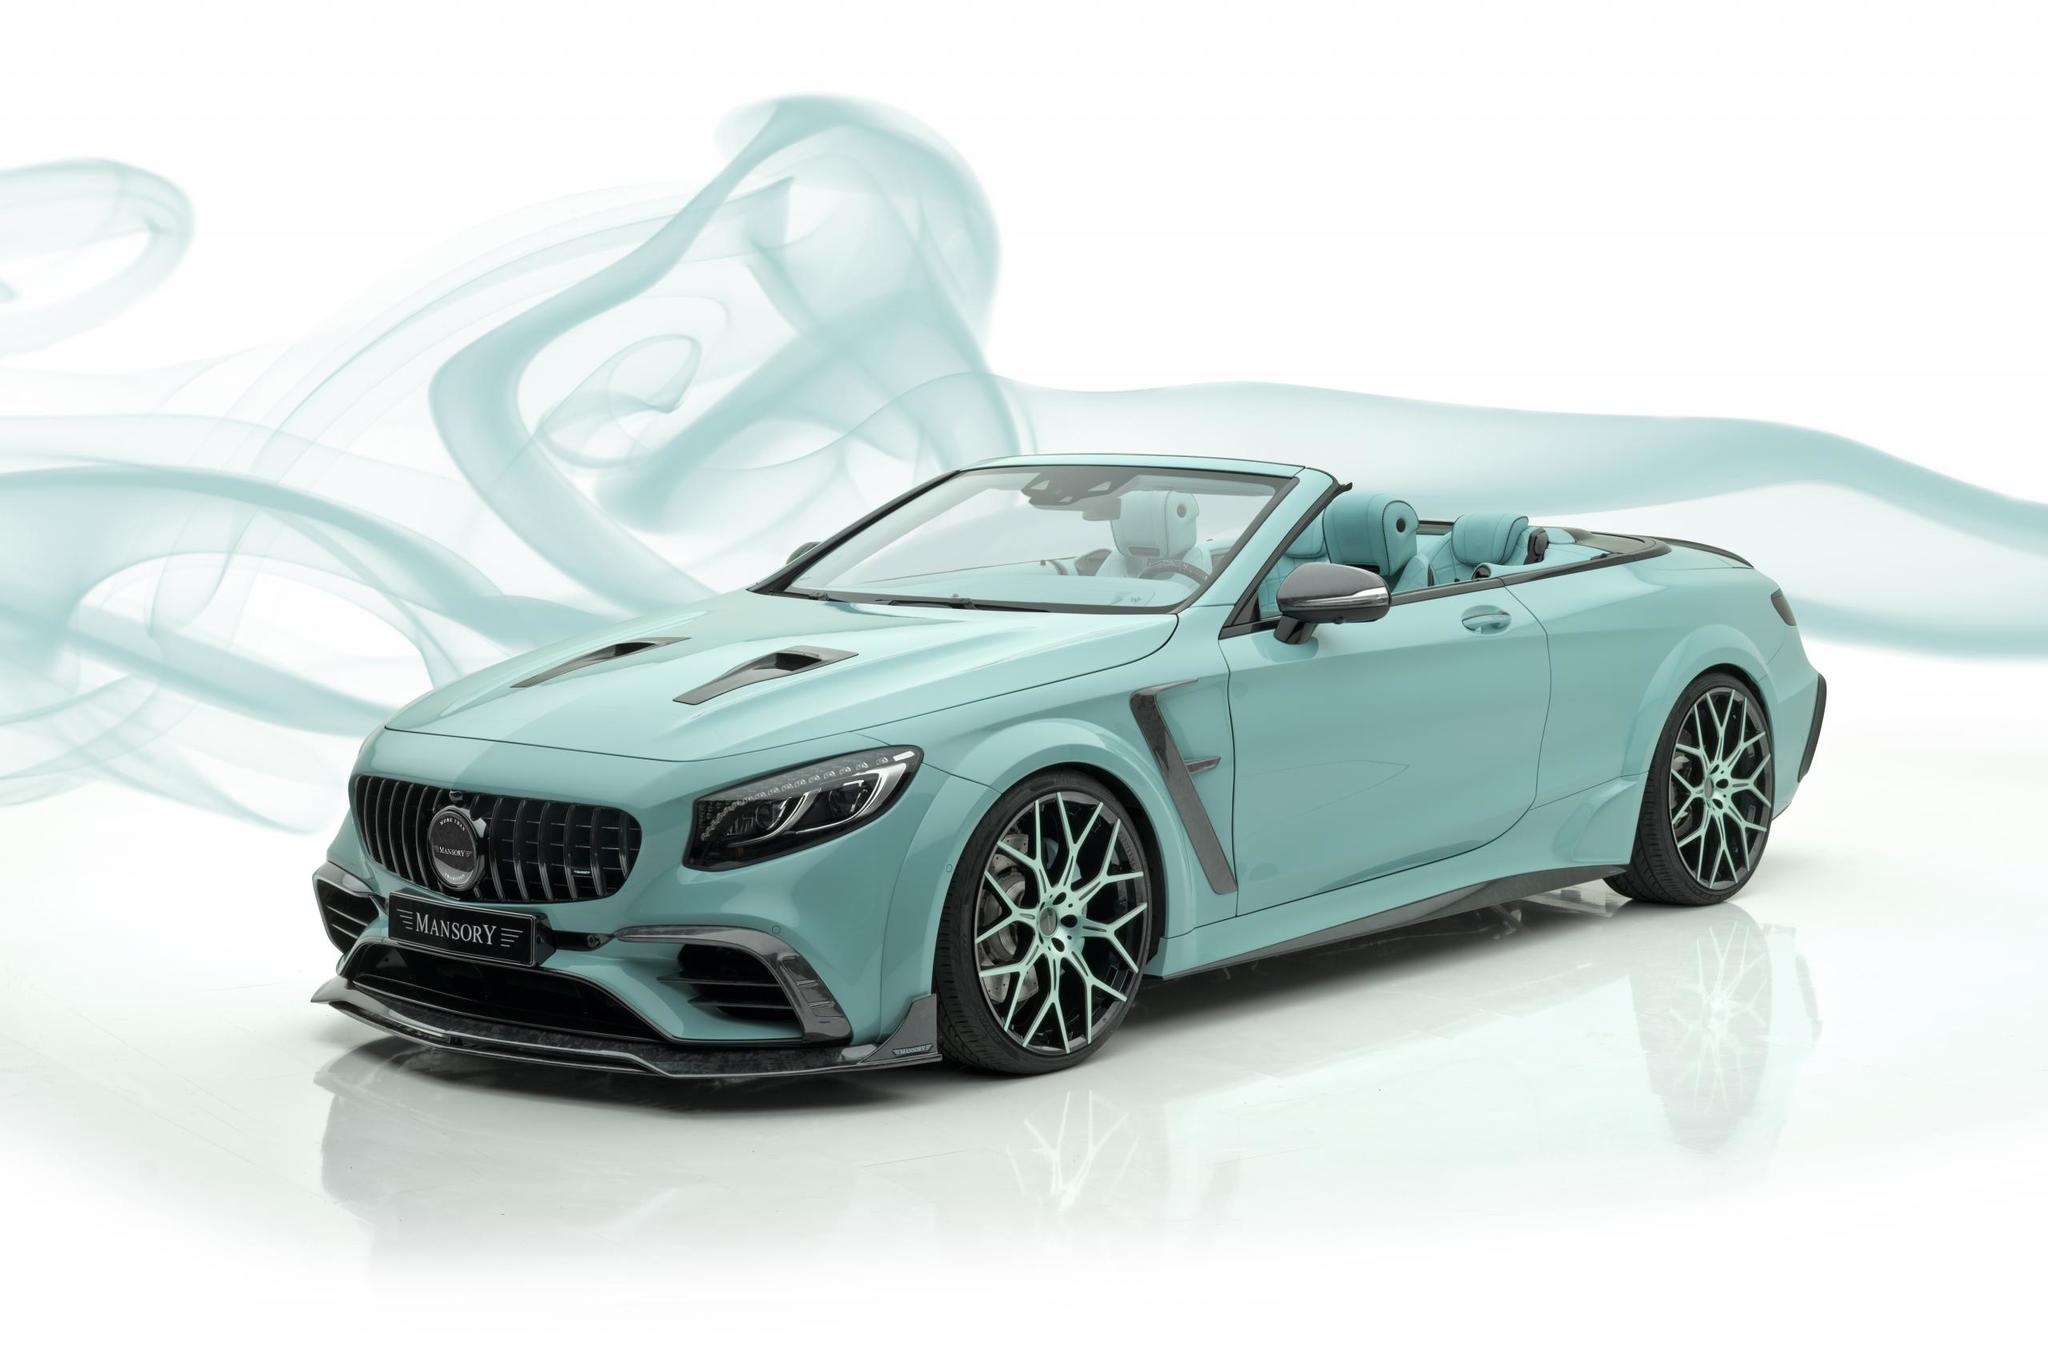 Mansory body kit for Mercedes S-Class Coupe new model